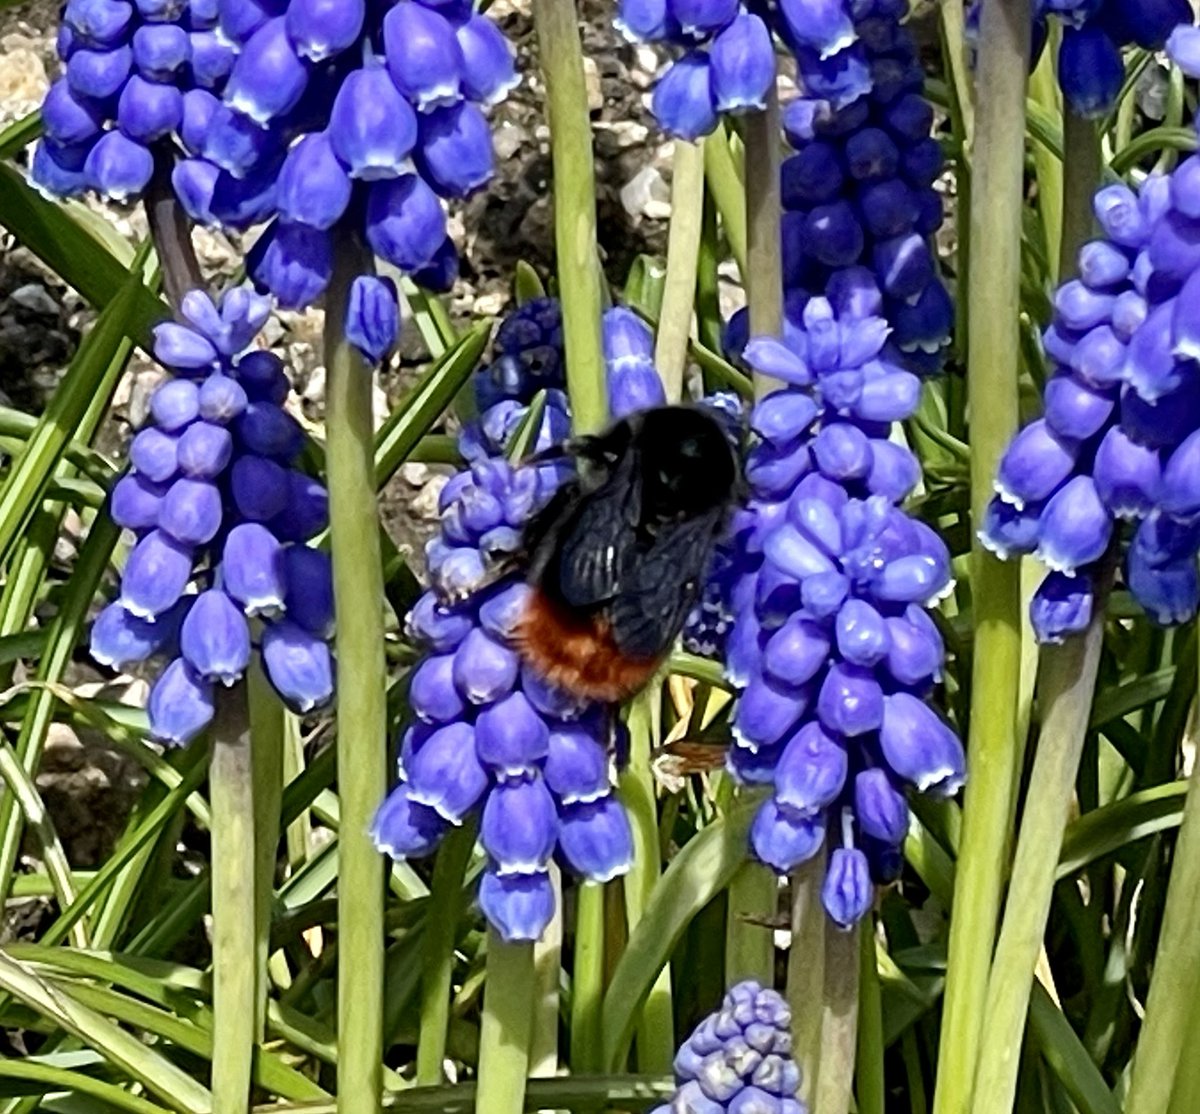 A red tailed bumblebee seen in a neighbour’s garden near Aberdeen 🐝 

#redtailedbumblebee #bees #saveourbees #insects #insectphotography #wildlife #wildlifephotography #Aberdeenshire